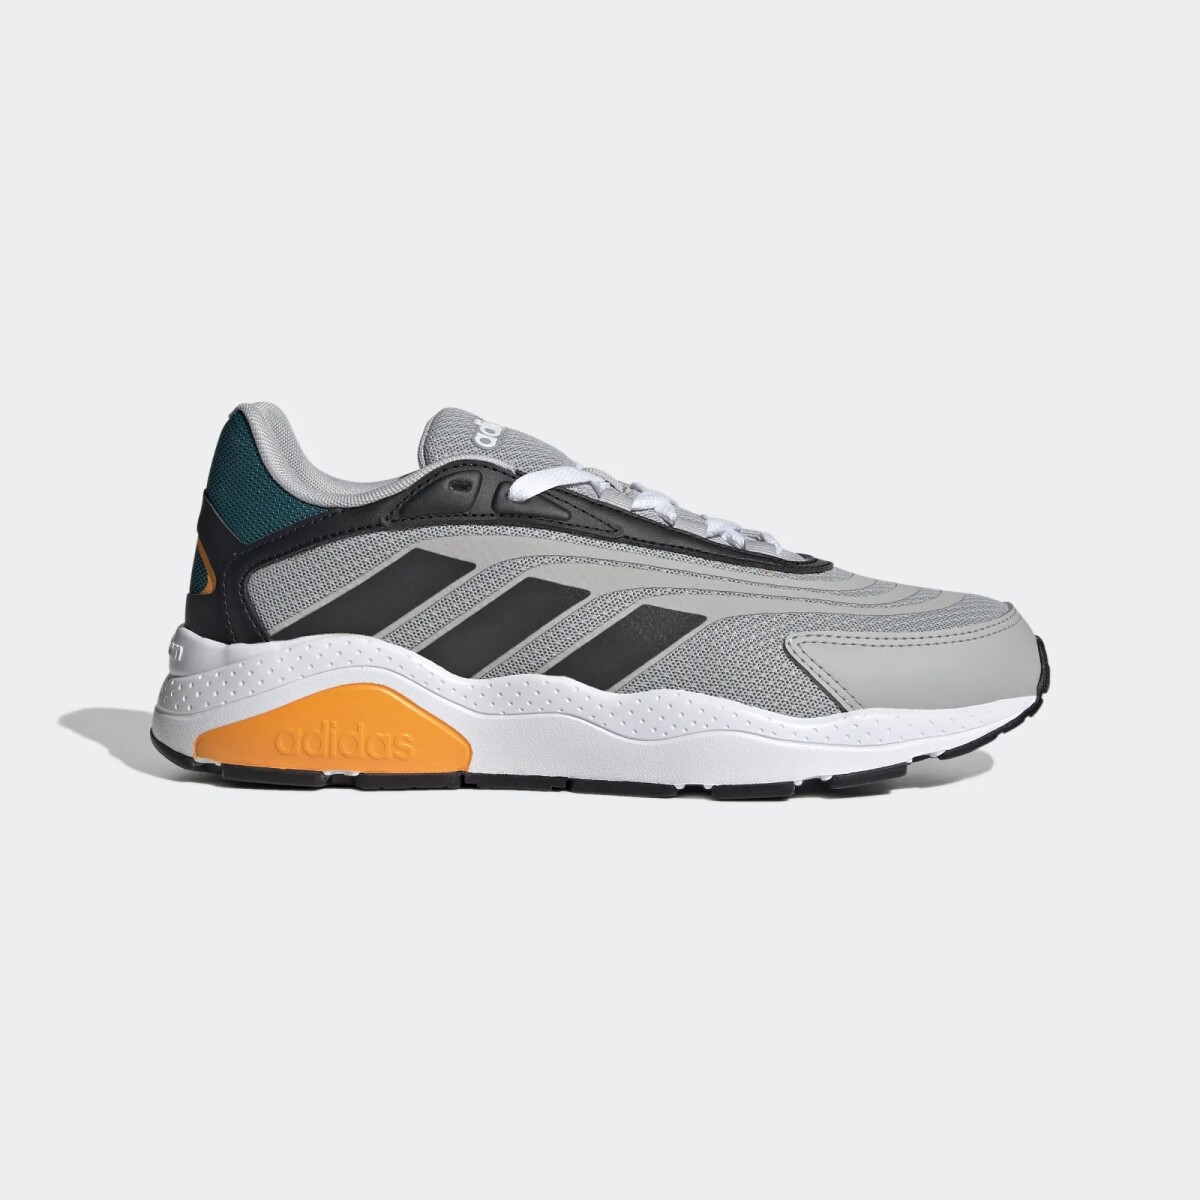 Champion Adidas Running Hombre Crazychaos 2.0 - S/C 